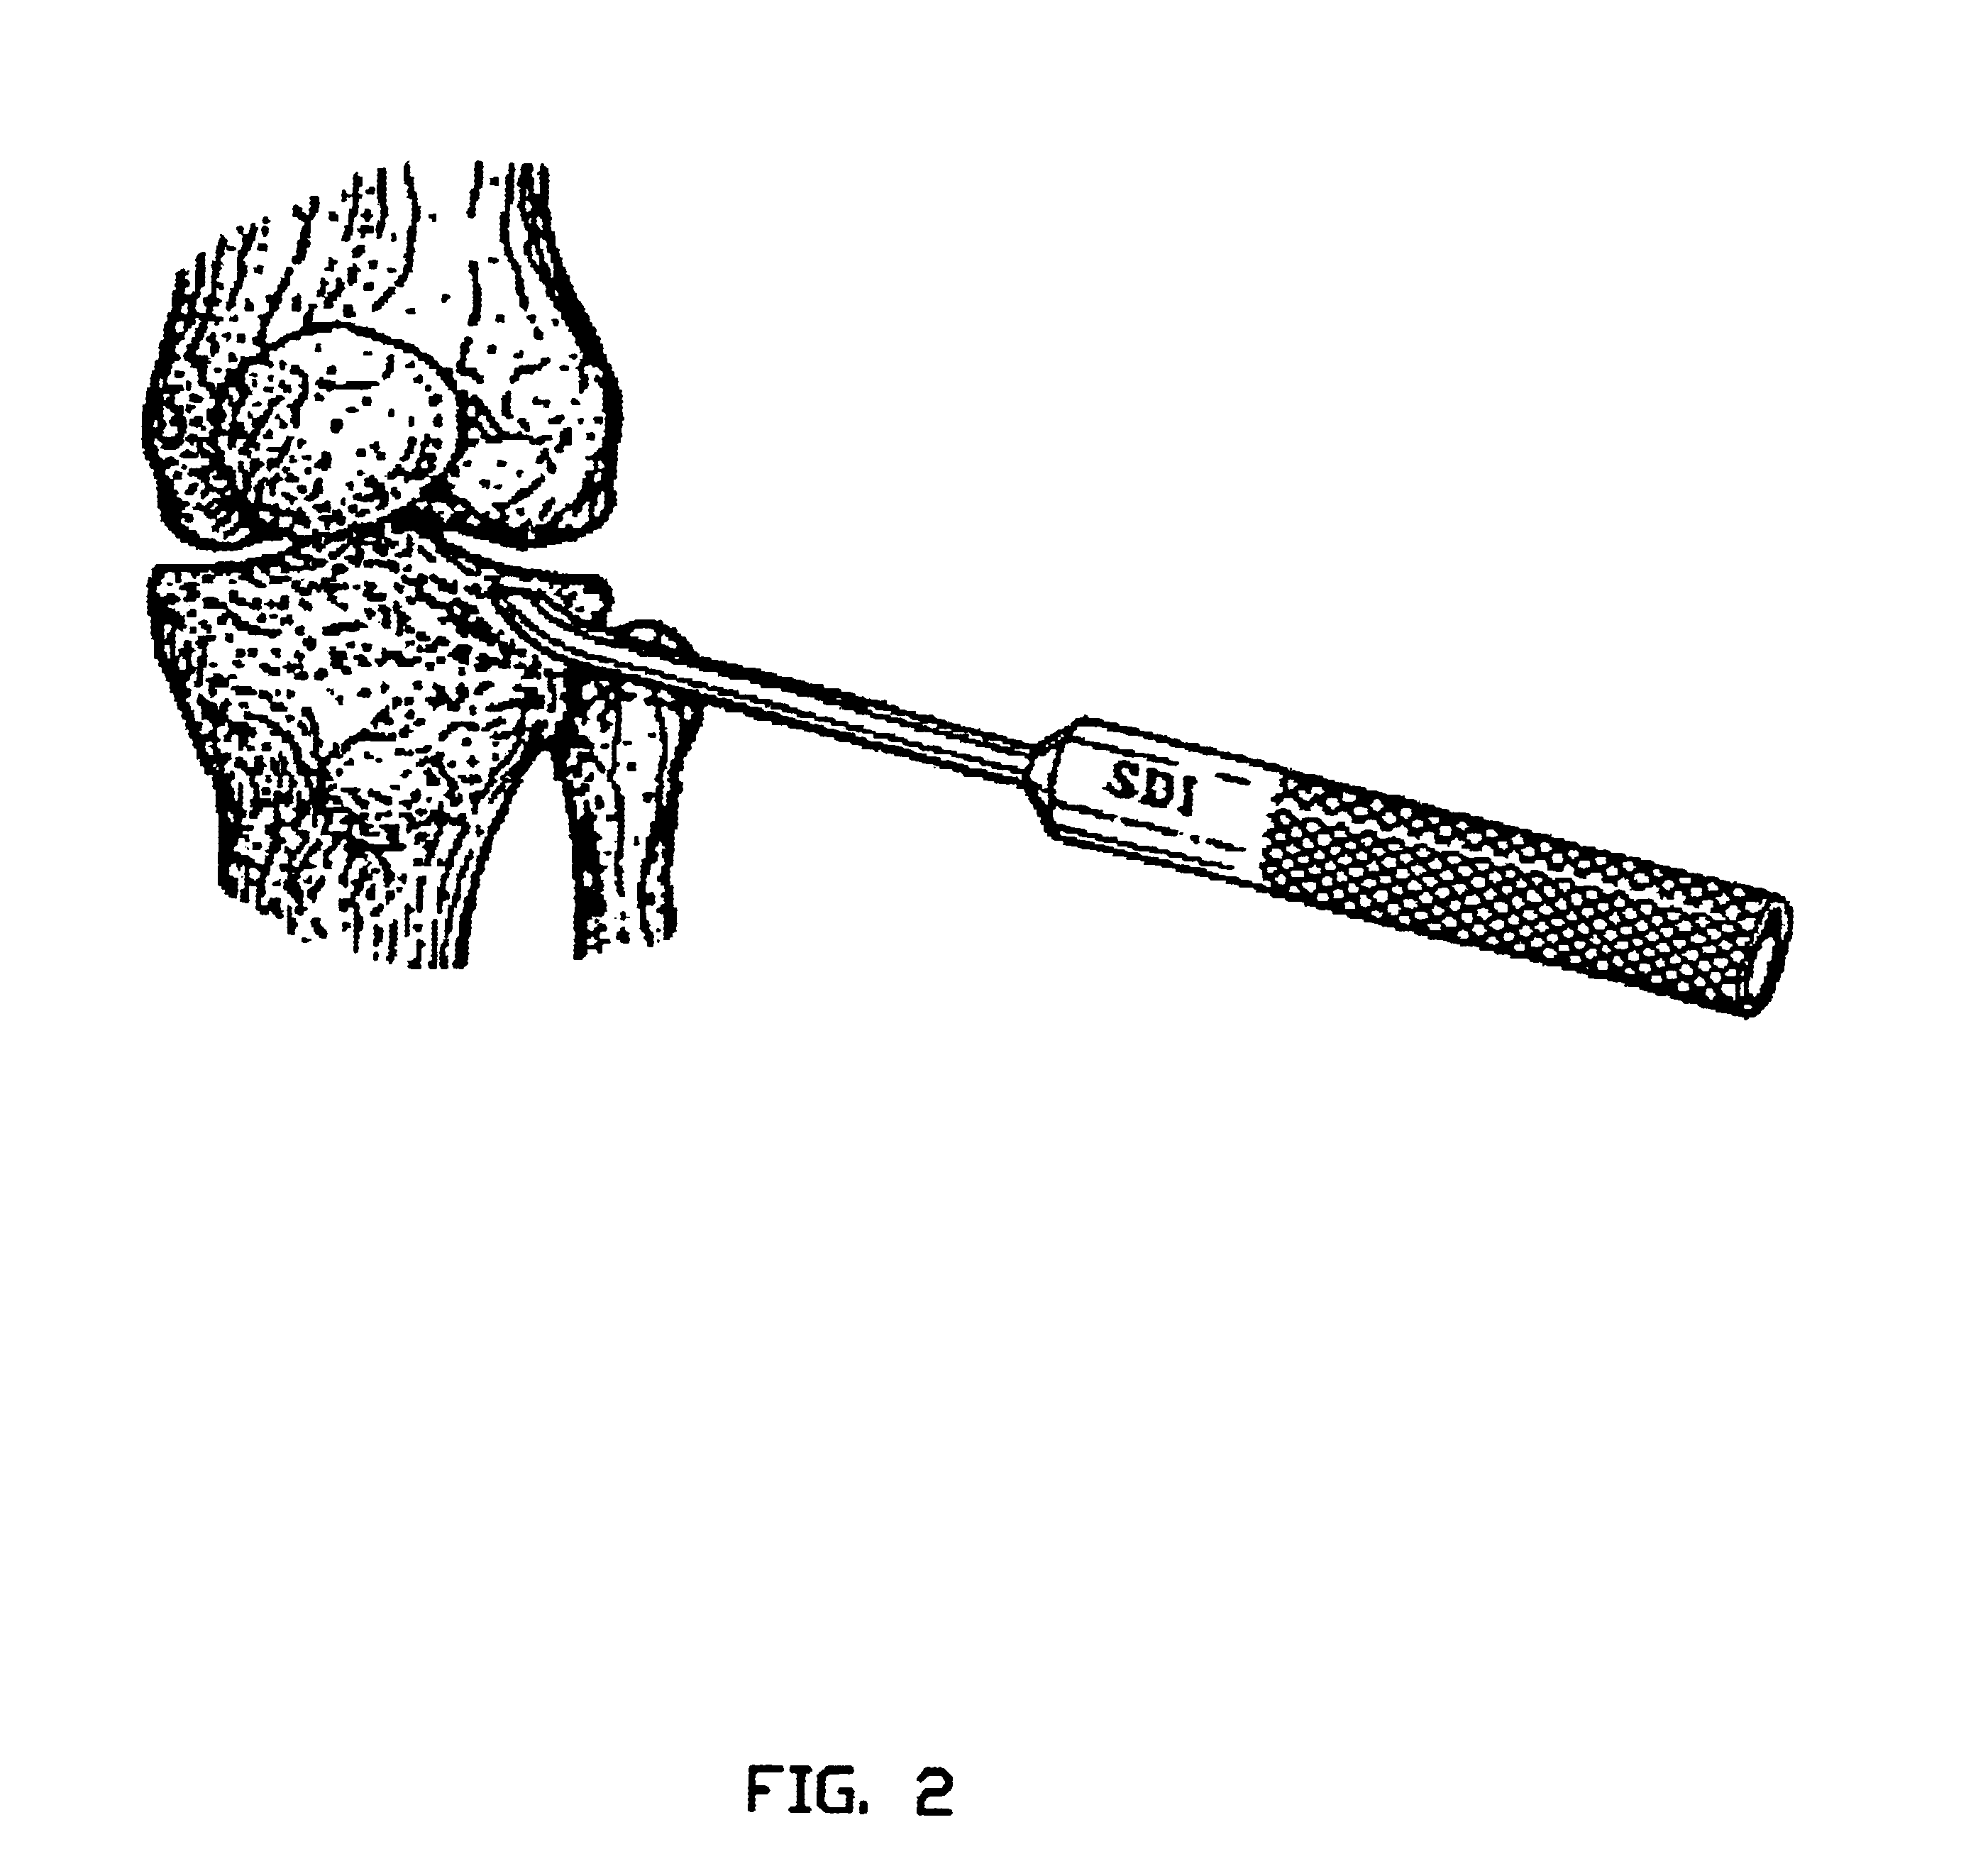 Process and instrumentation for arthroscopic reduction of central and peripheral depression fractures